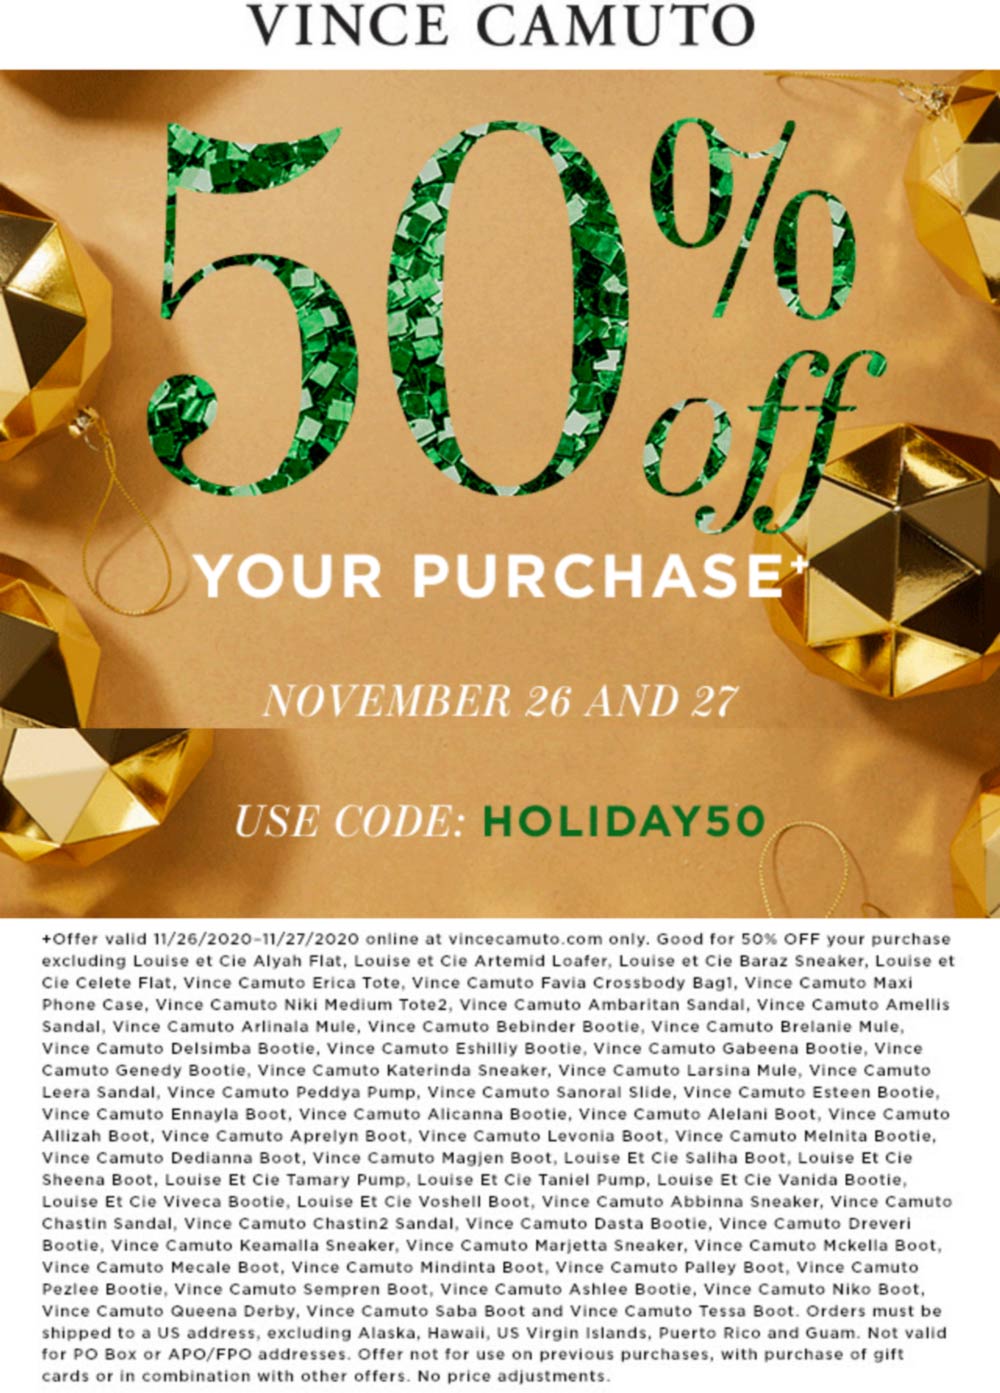 Vince Camuto stores Coupon  50% off at Vince Camuto via promo code HOLIDAY50 #vincecamuto 